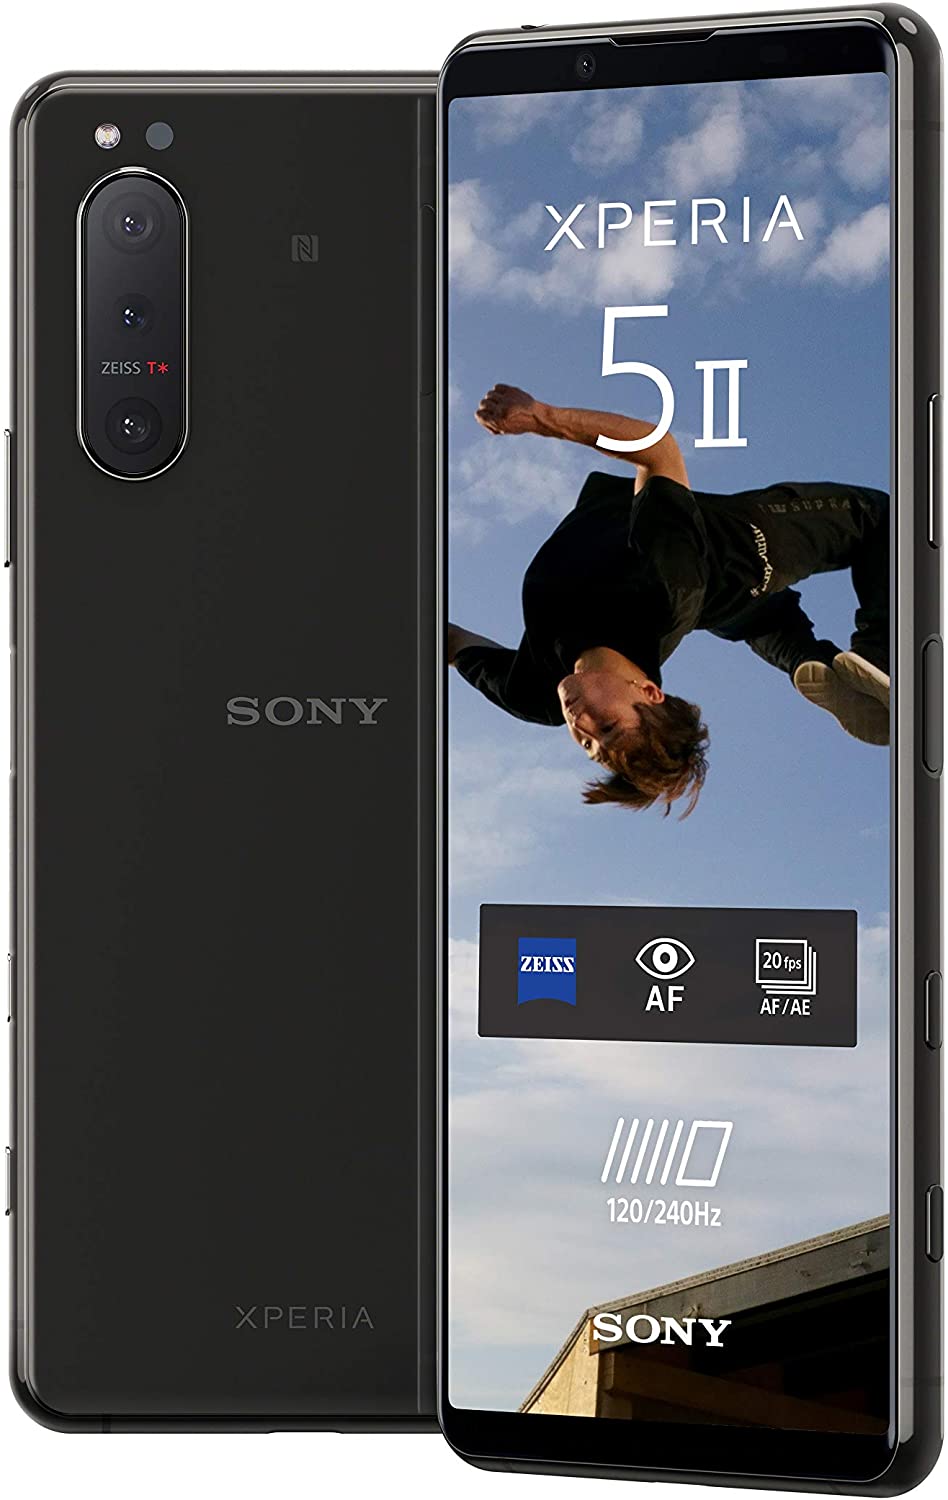 Sony Xperia 5 II and Specs